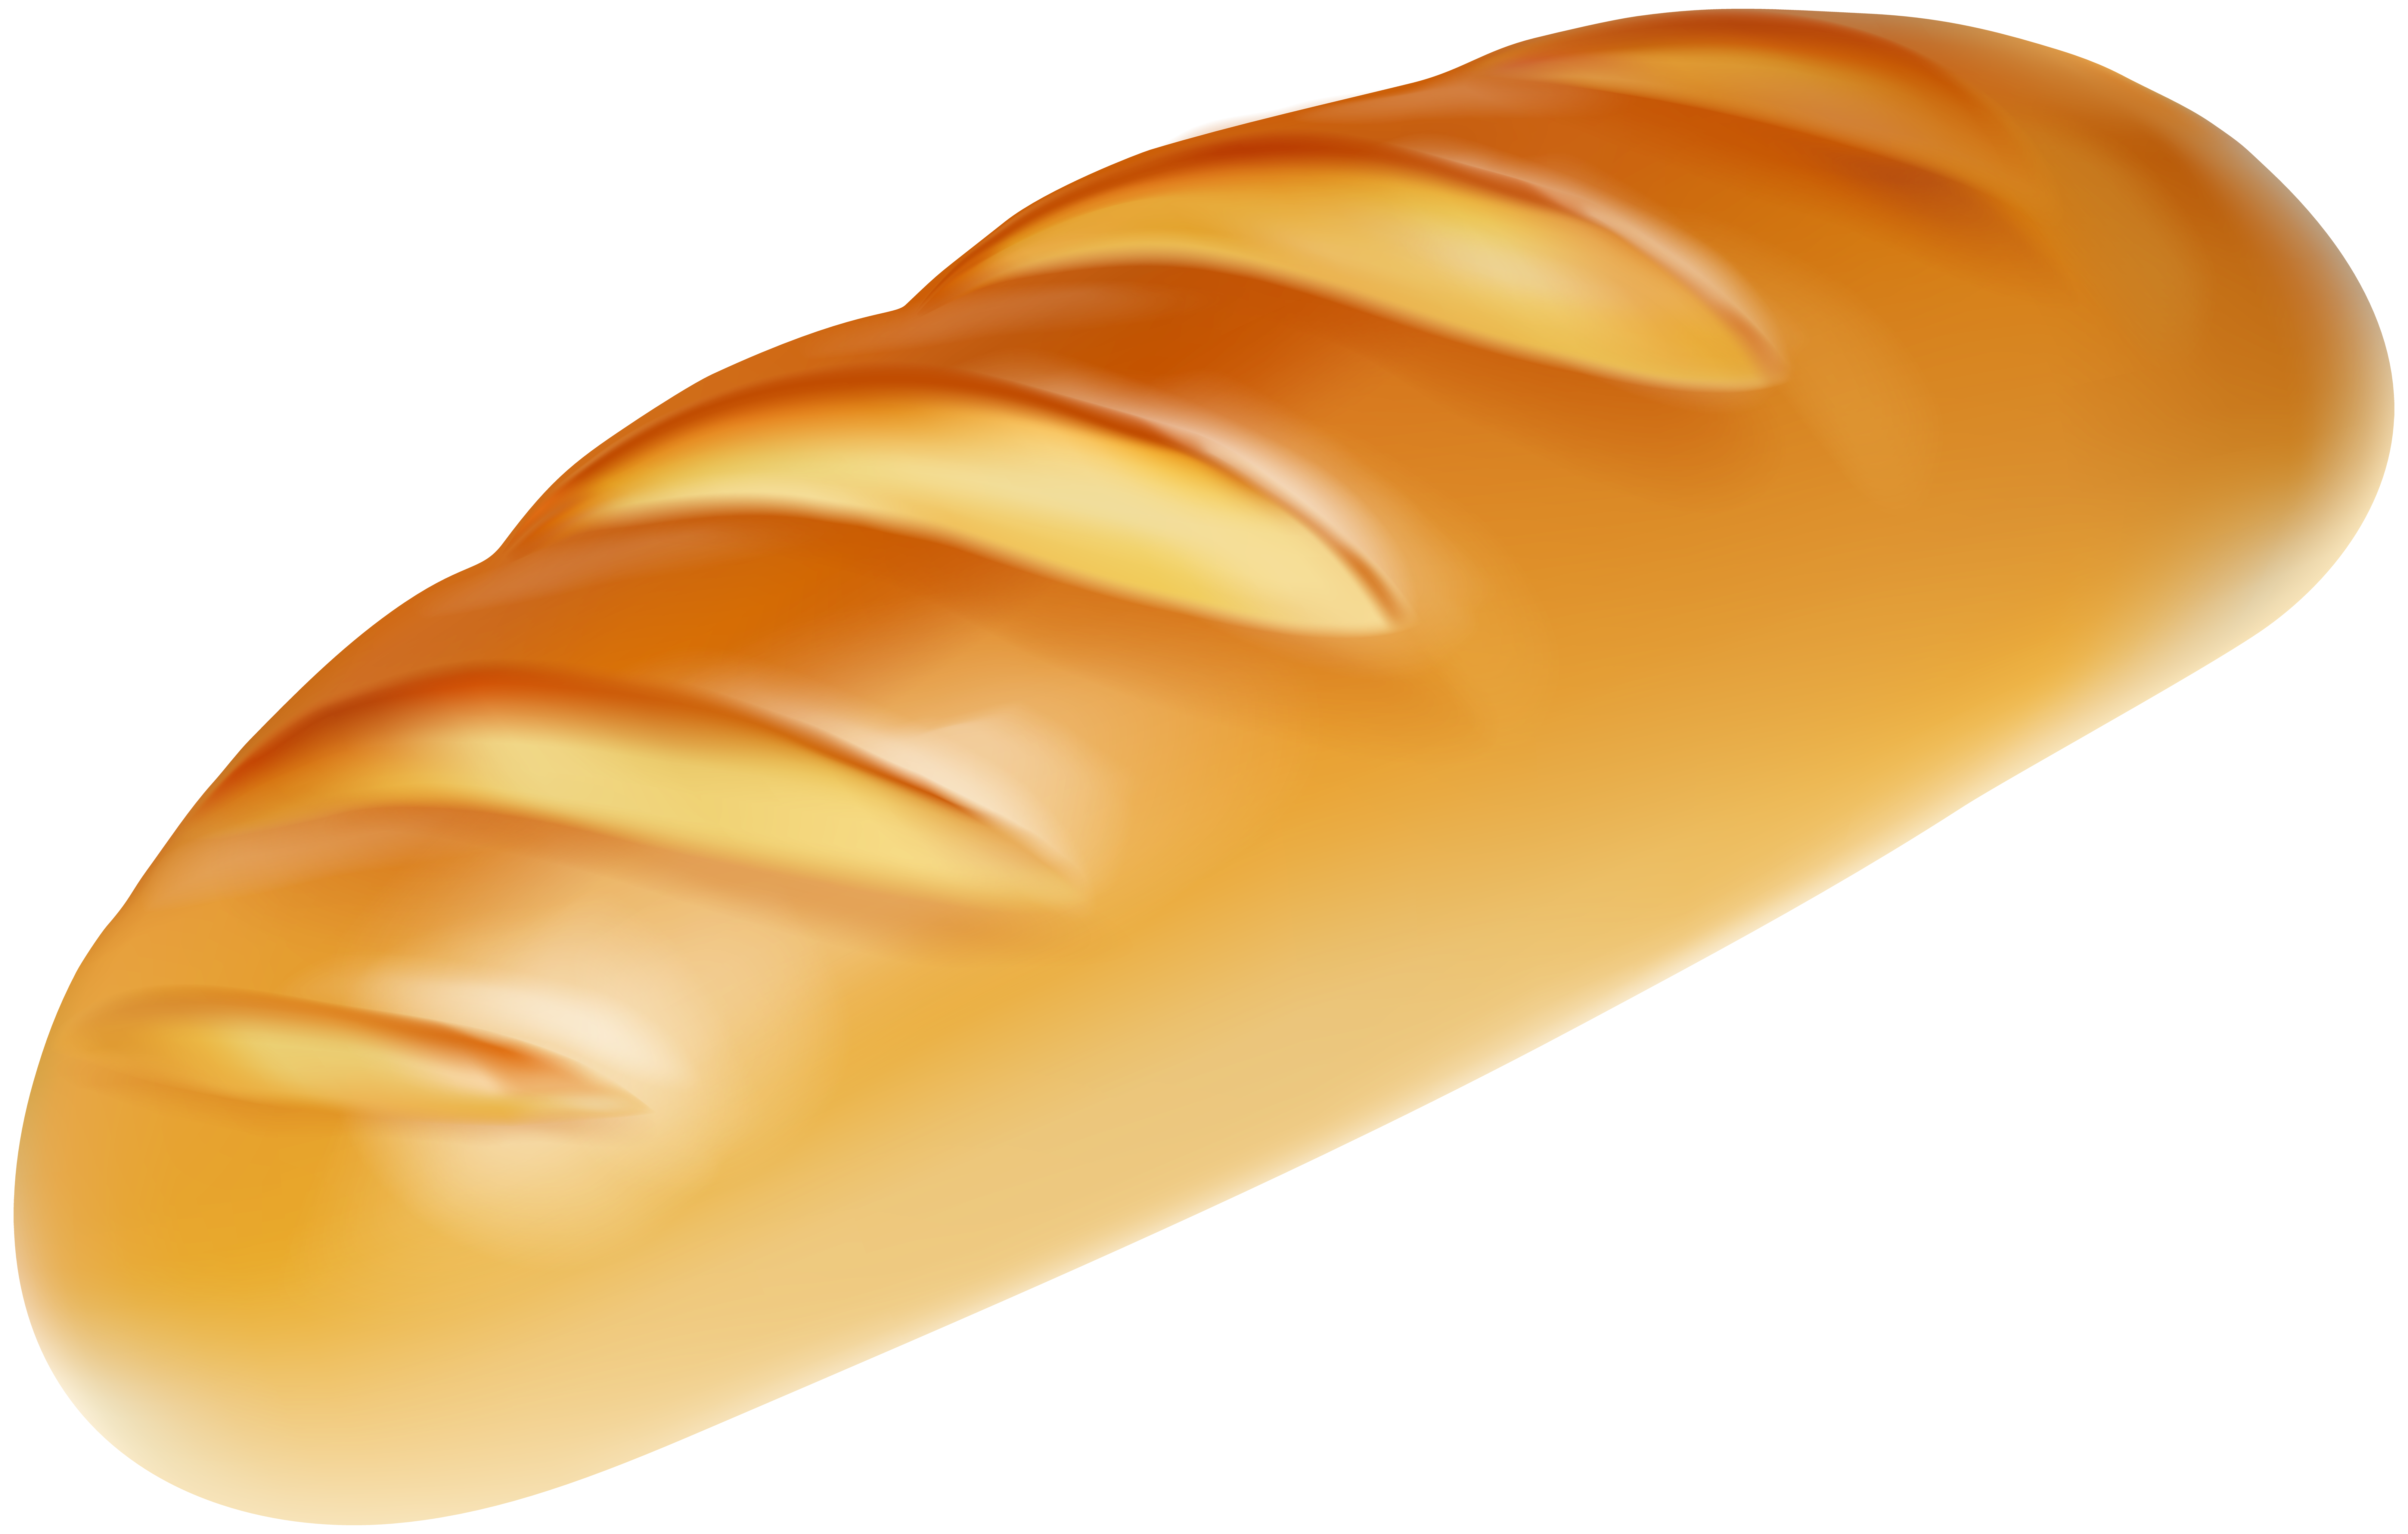 bakery food png